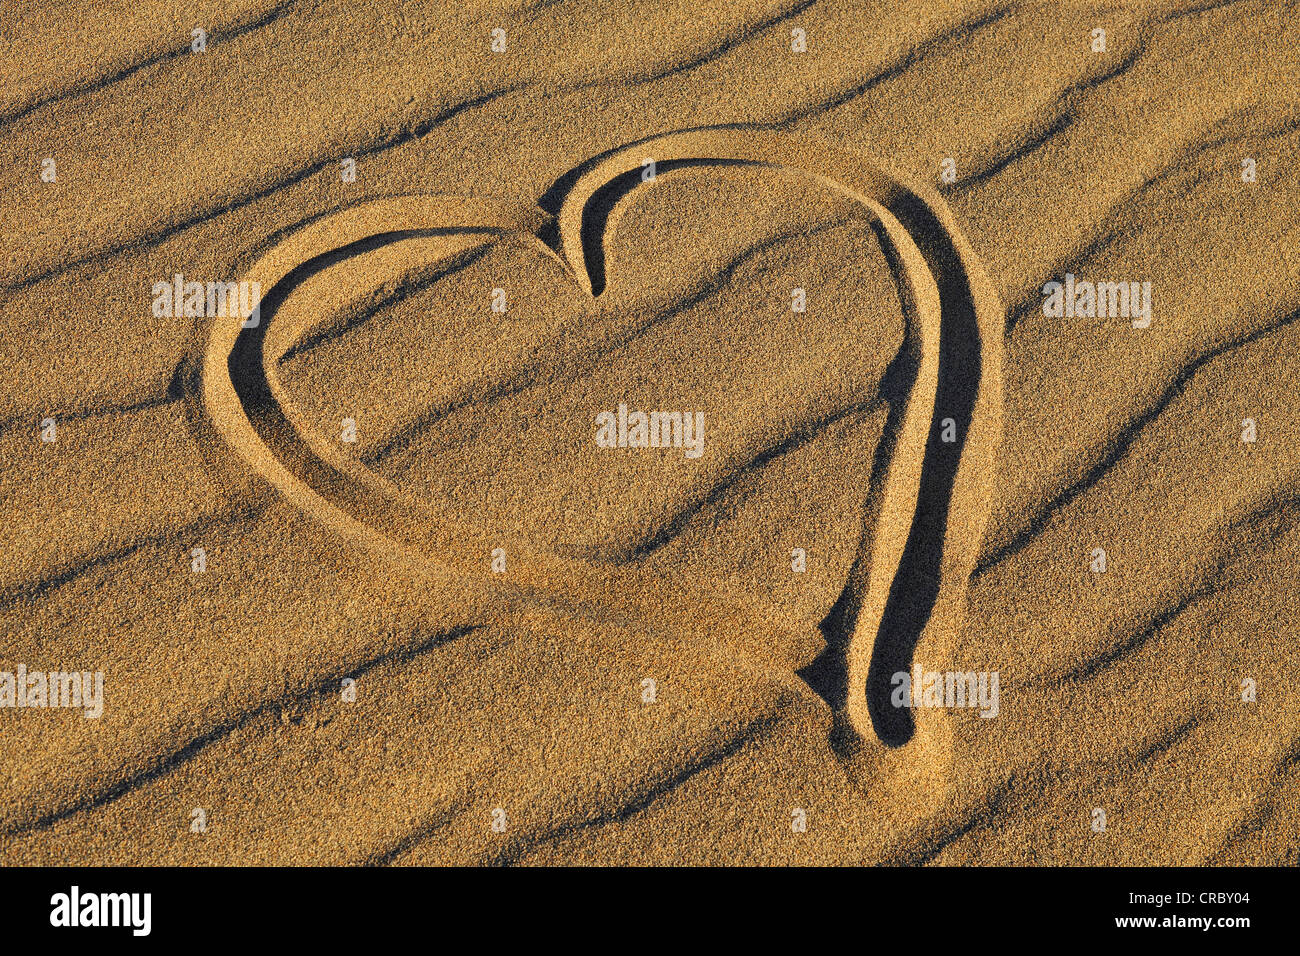 Ripple marks and a heart drawn in the sands of the Mesquite Flat Sand Dunes, Stovepipe Wells, Death Valley National Park Stock Photo